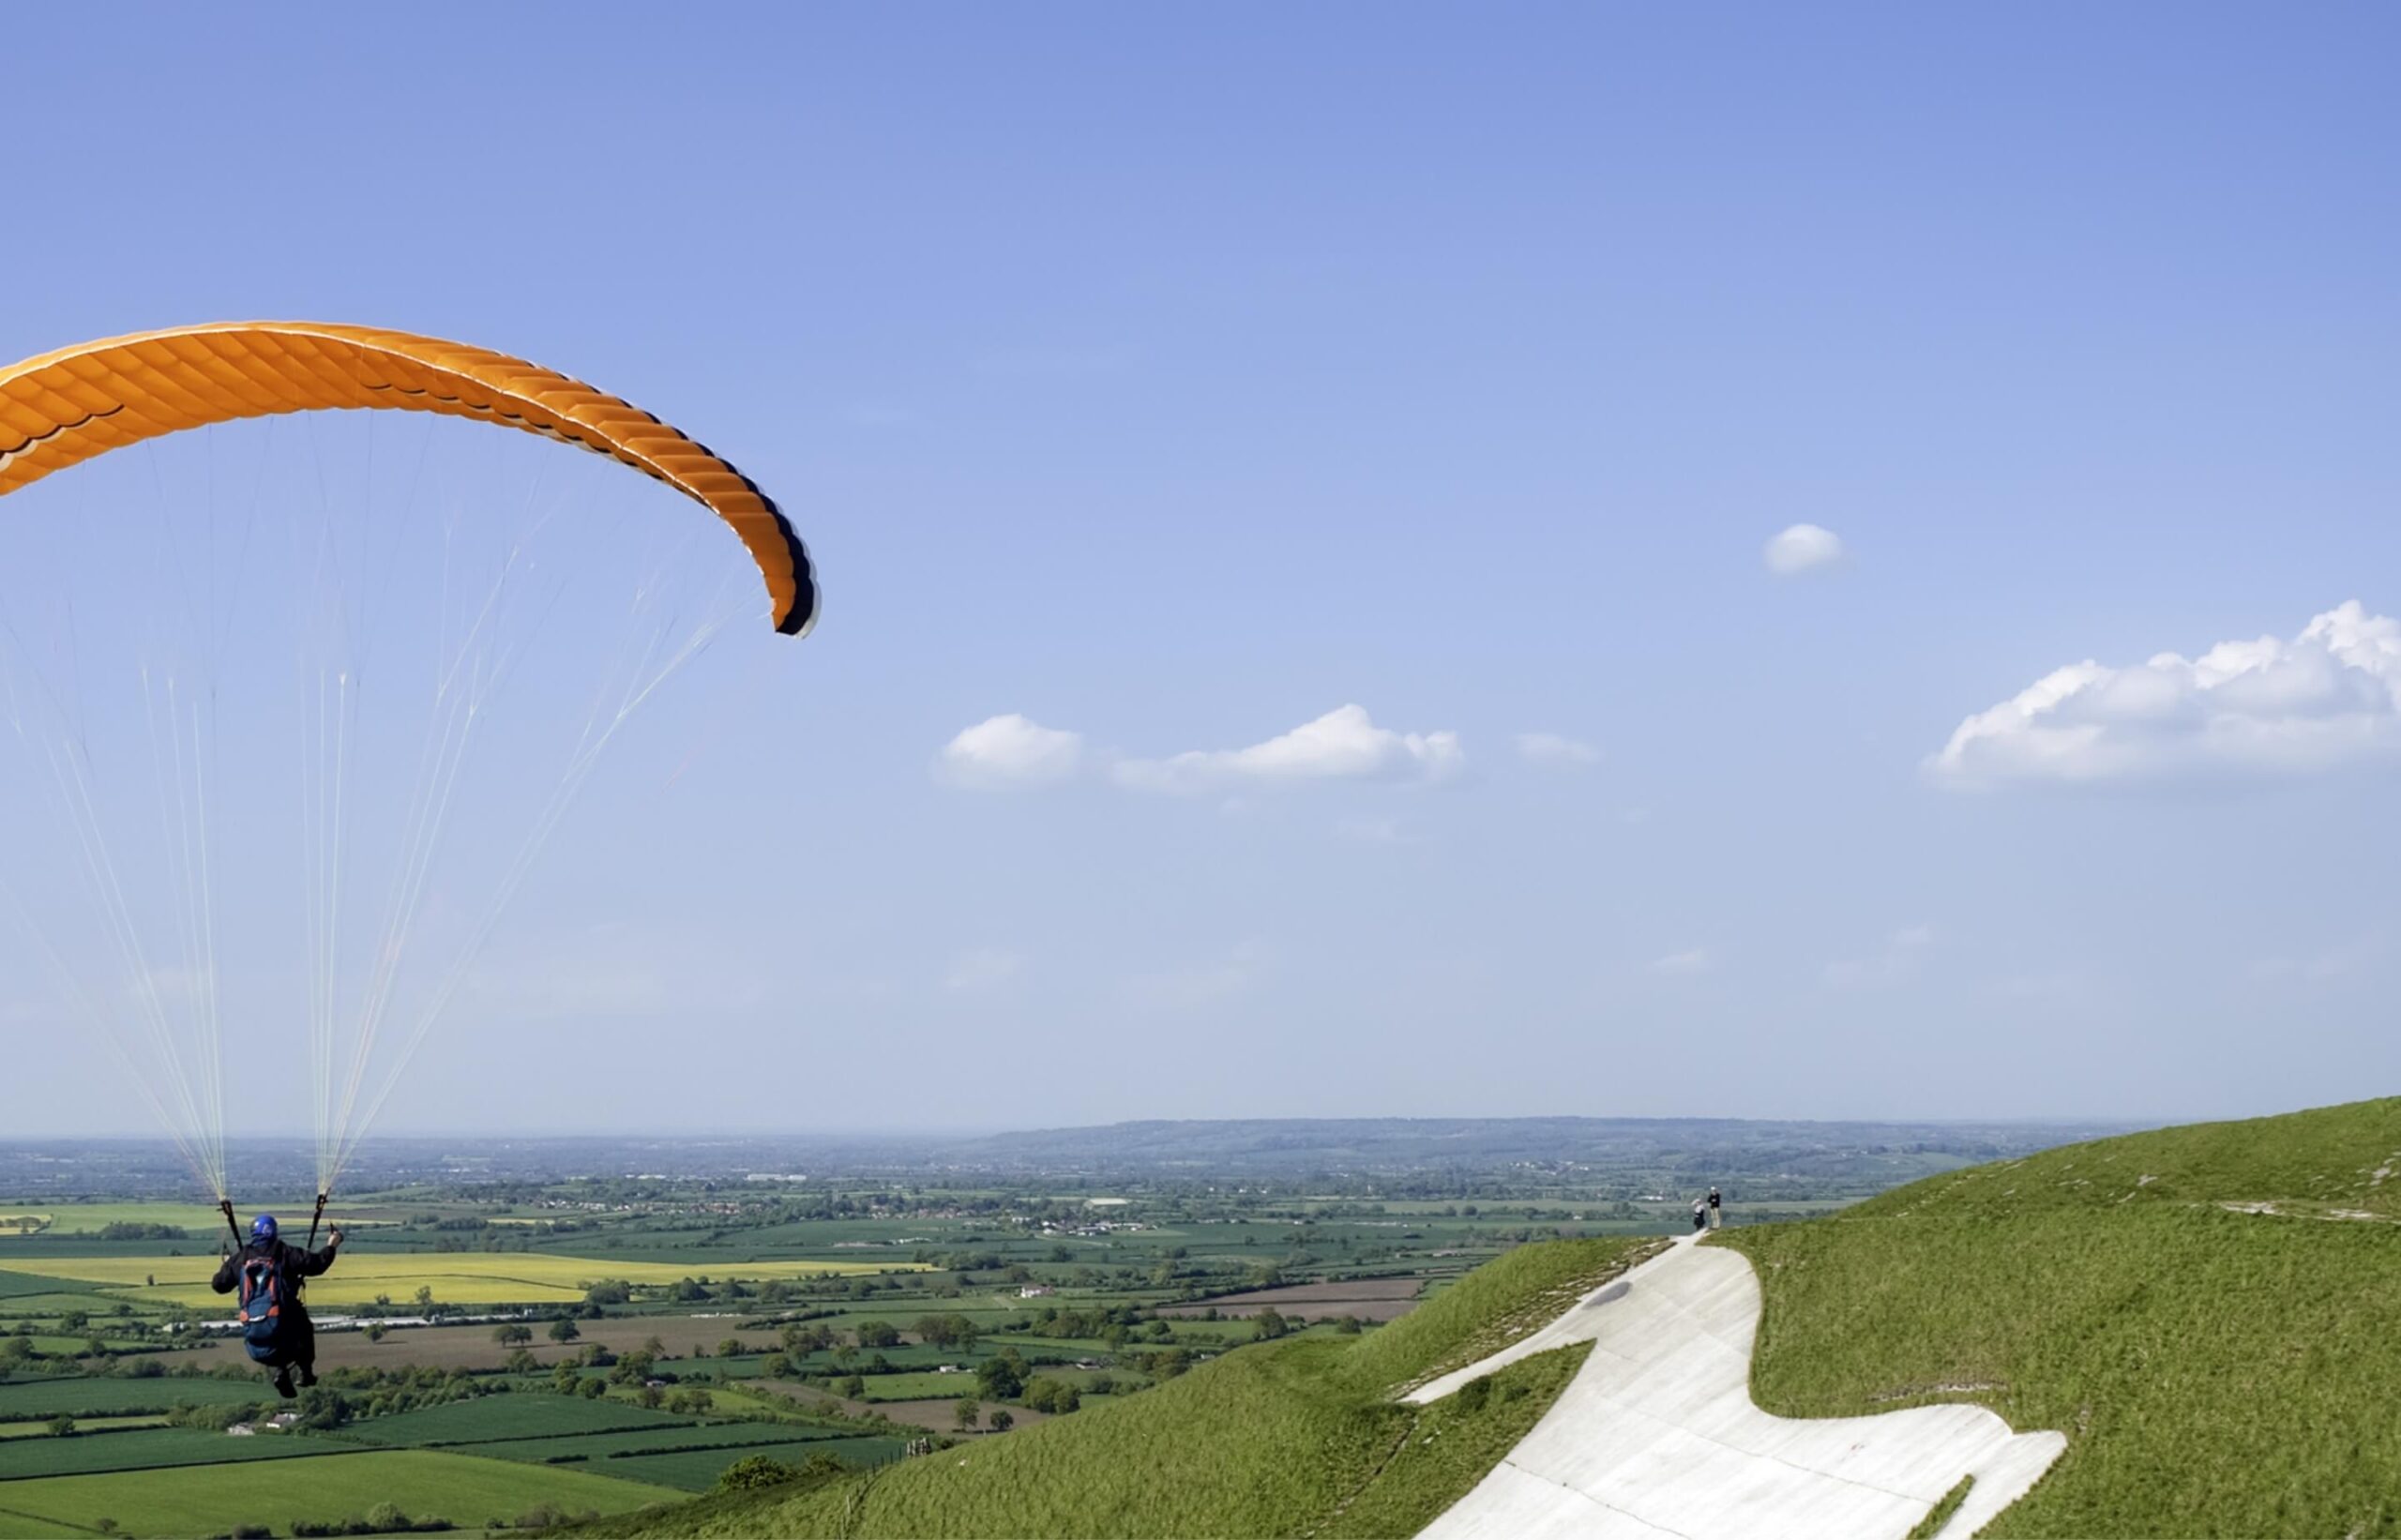 Person paragliding in Wiltshire countryside